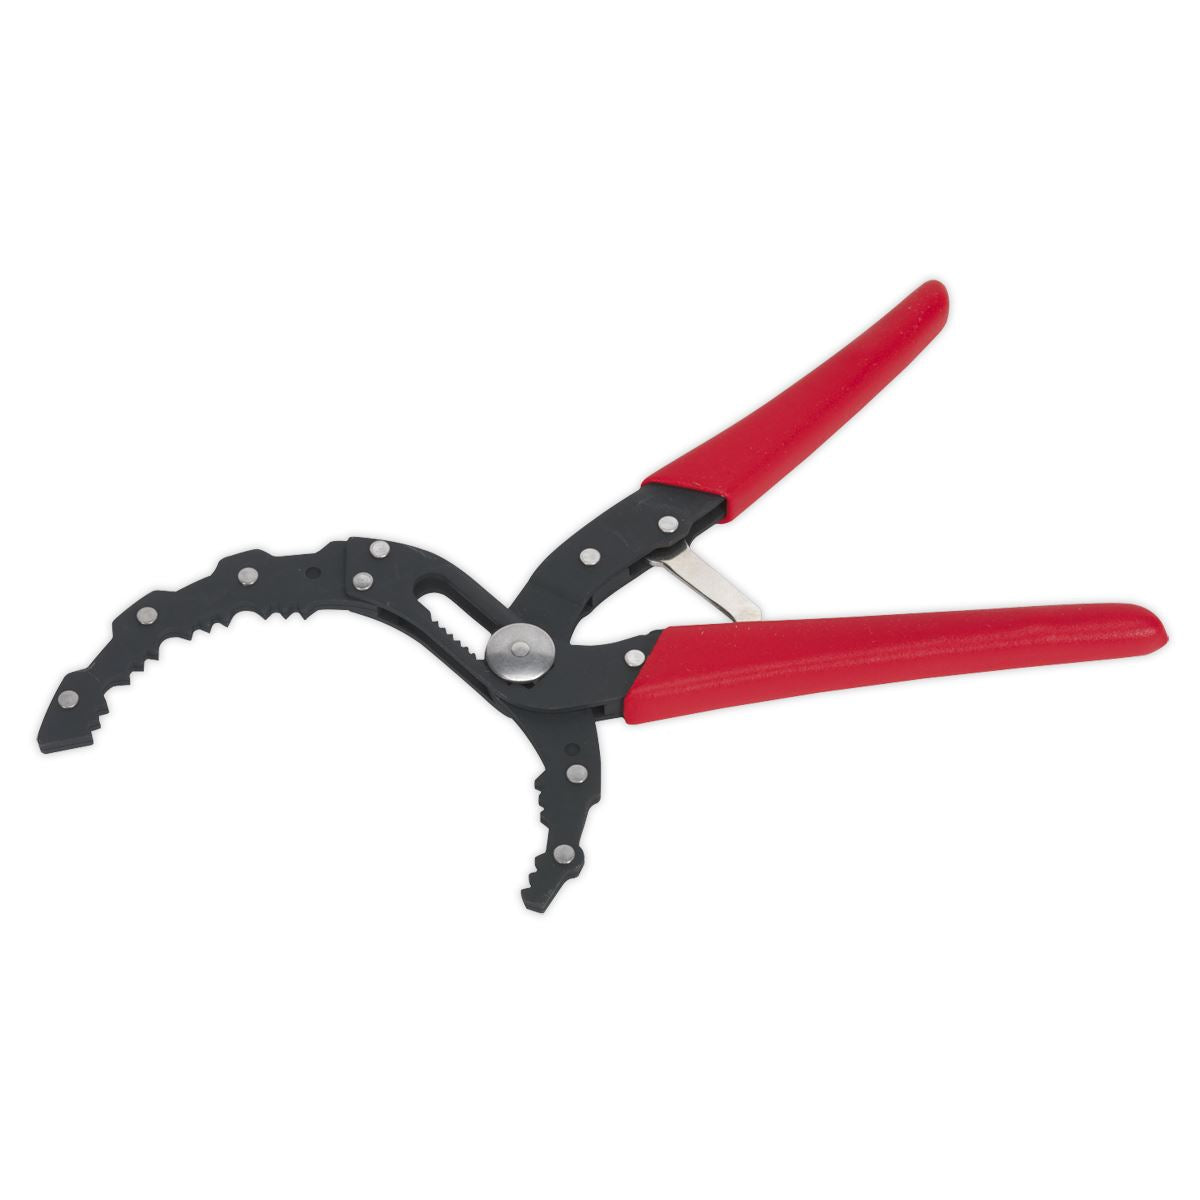 Sealey Auto-Adjusting Oil Filter Pliers Serrated Jaws Layered Steel